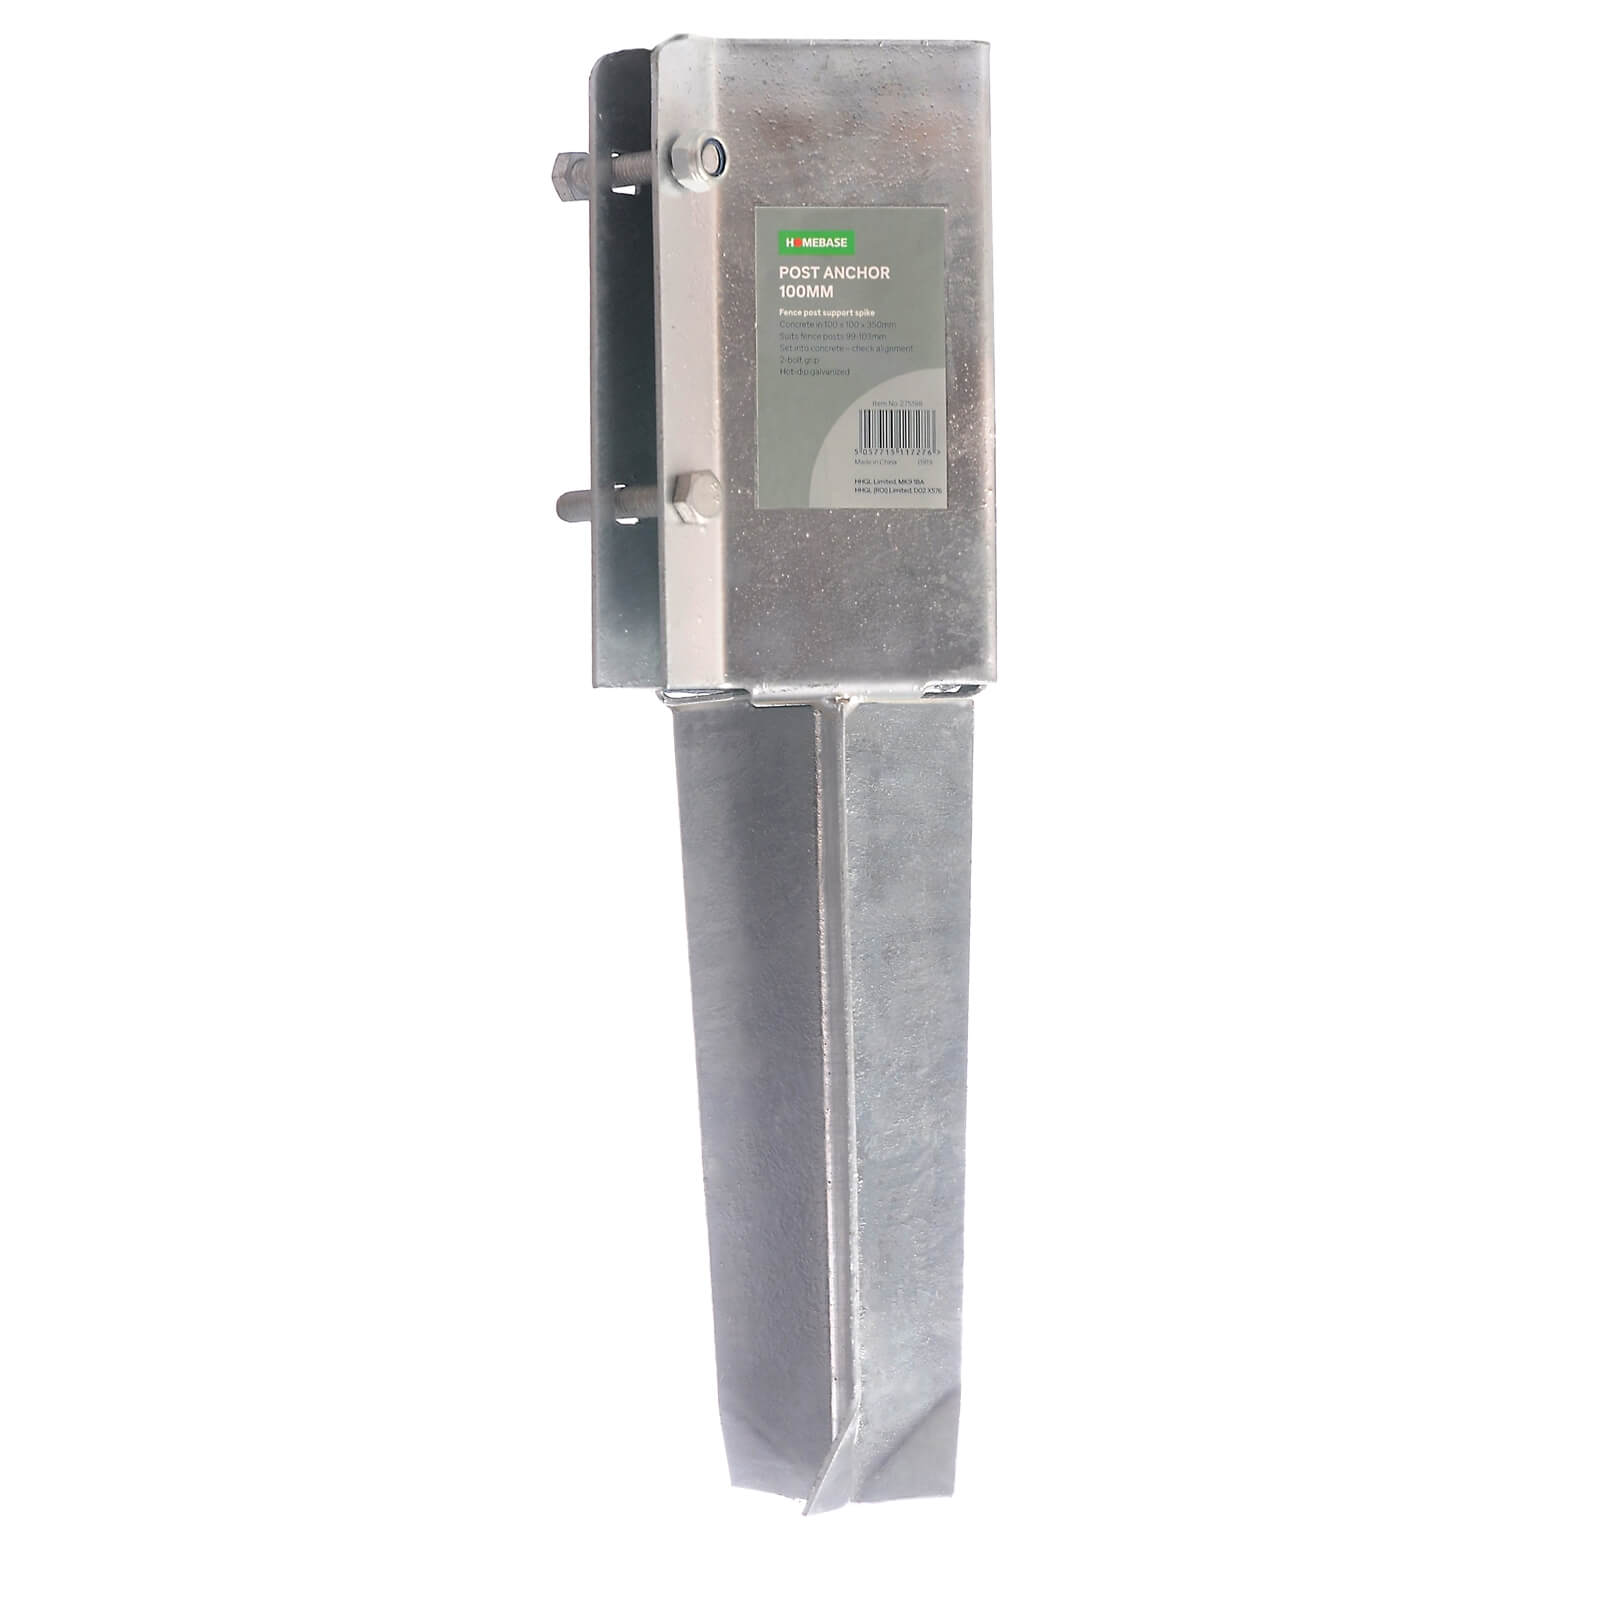 Photo of Post Anchor Concrete Fence Post Support Spike - 100mm